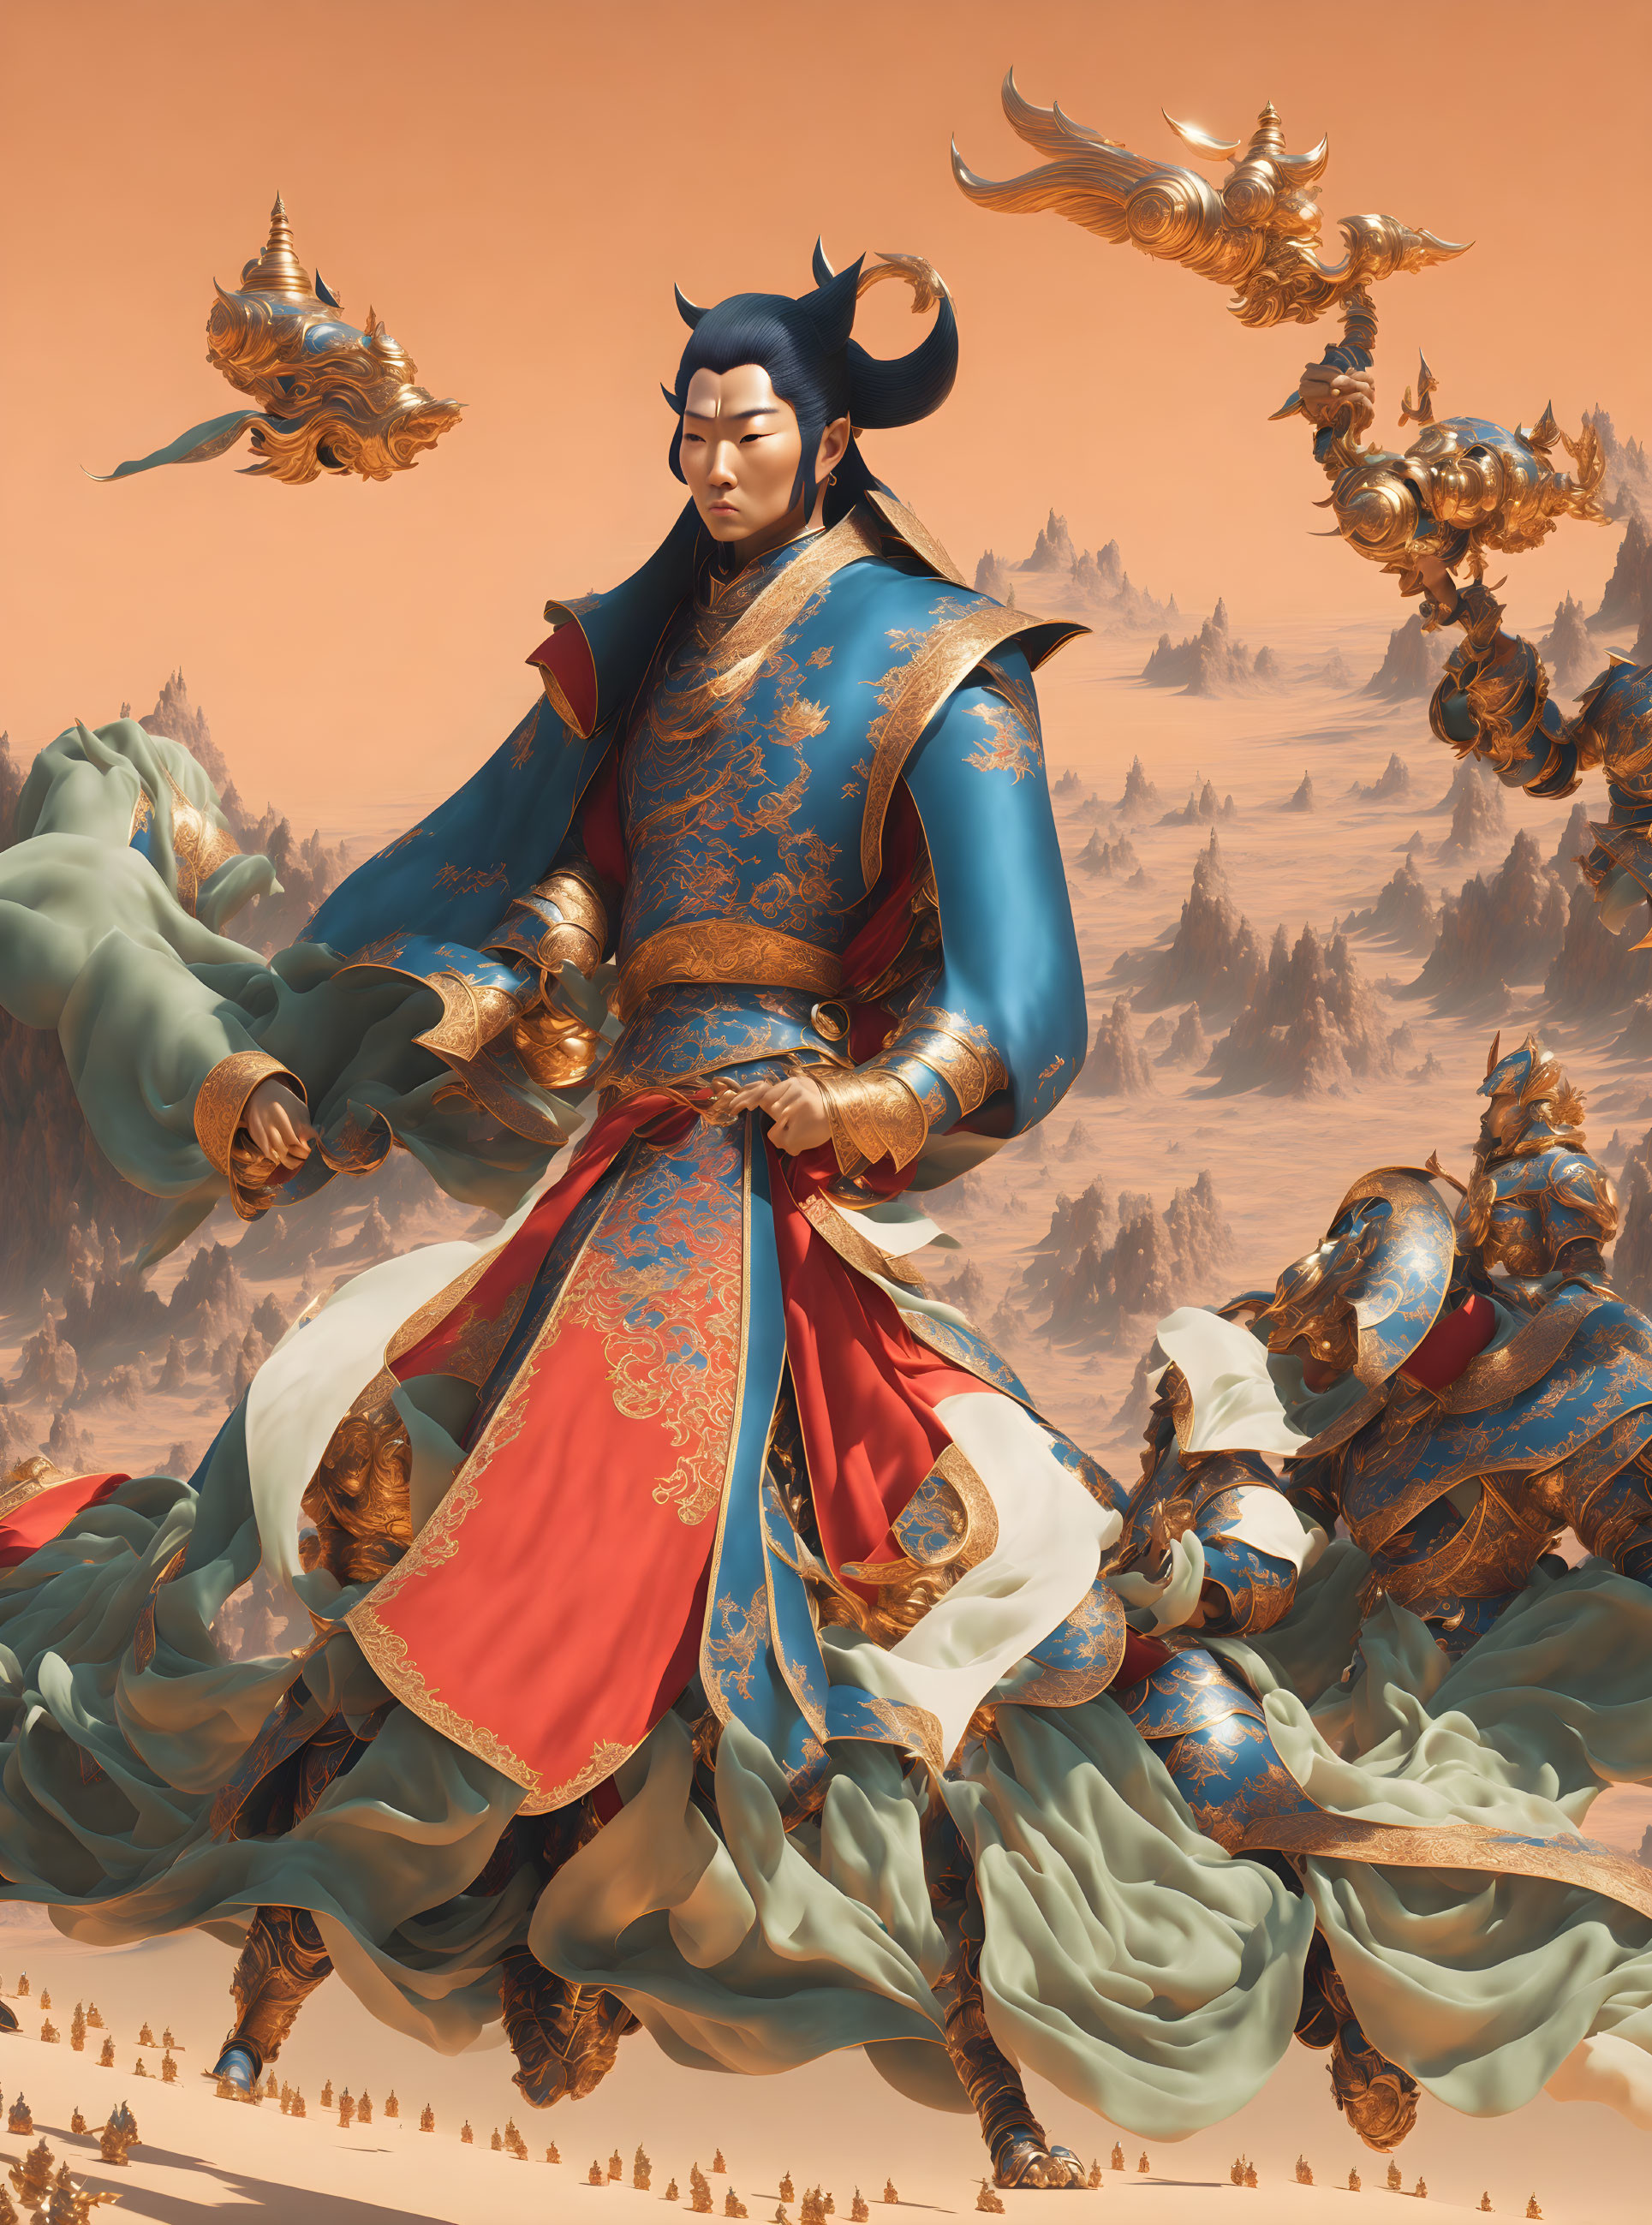 Majestic figure in blue and red armor with golden warriors and mythical beasts in surreal desert landscape